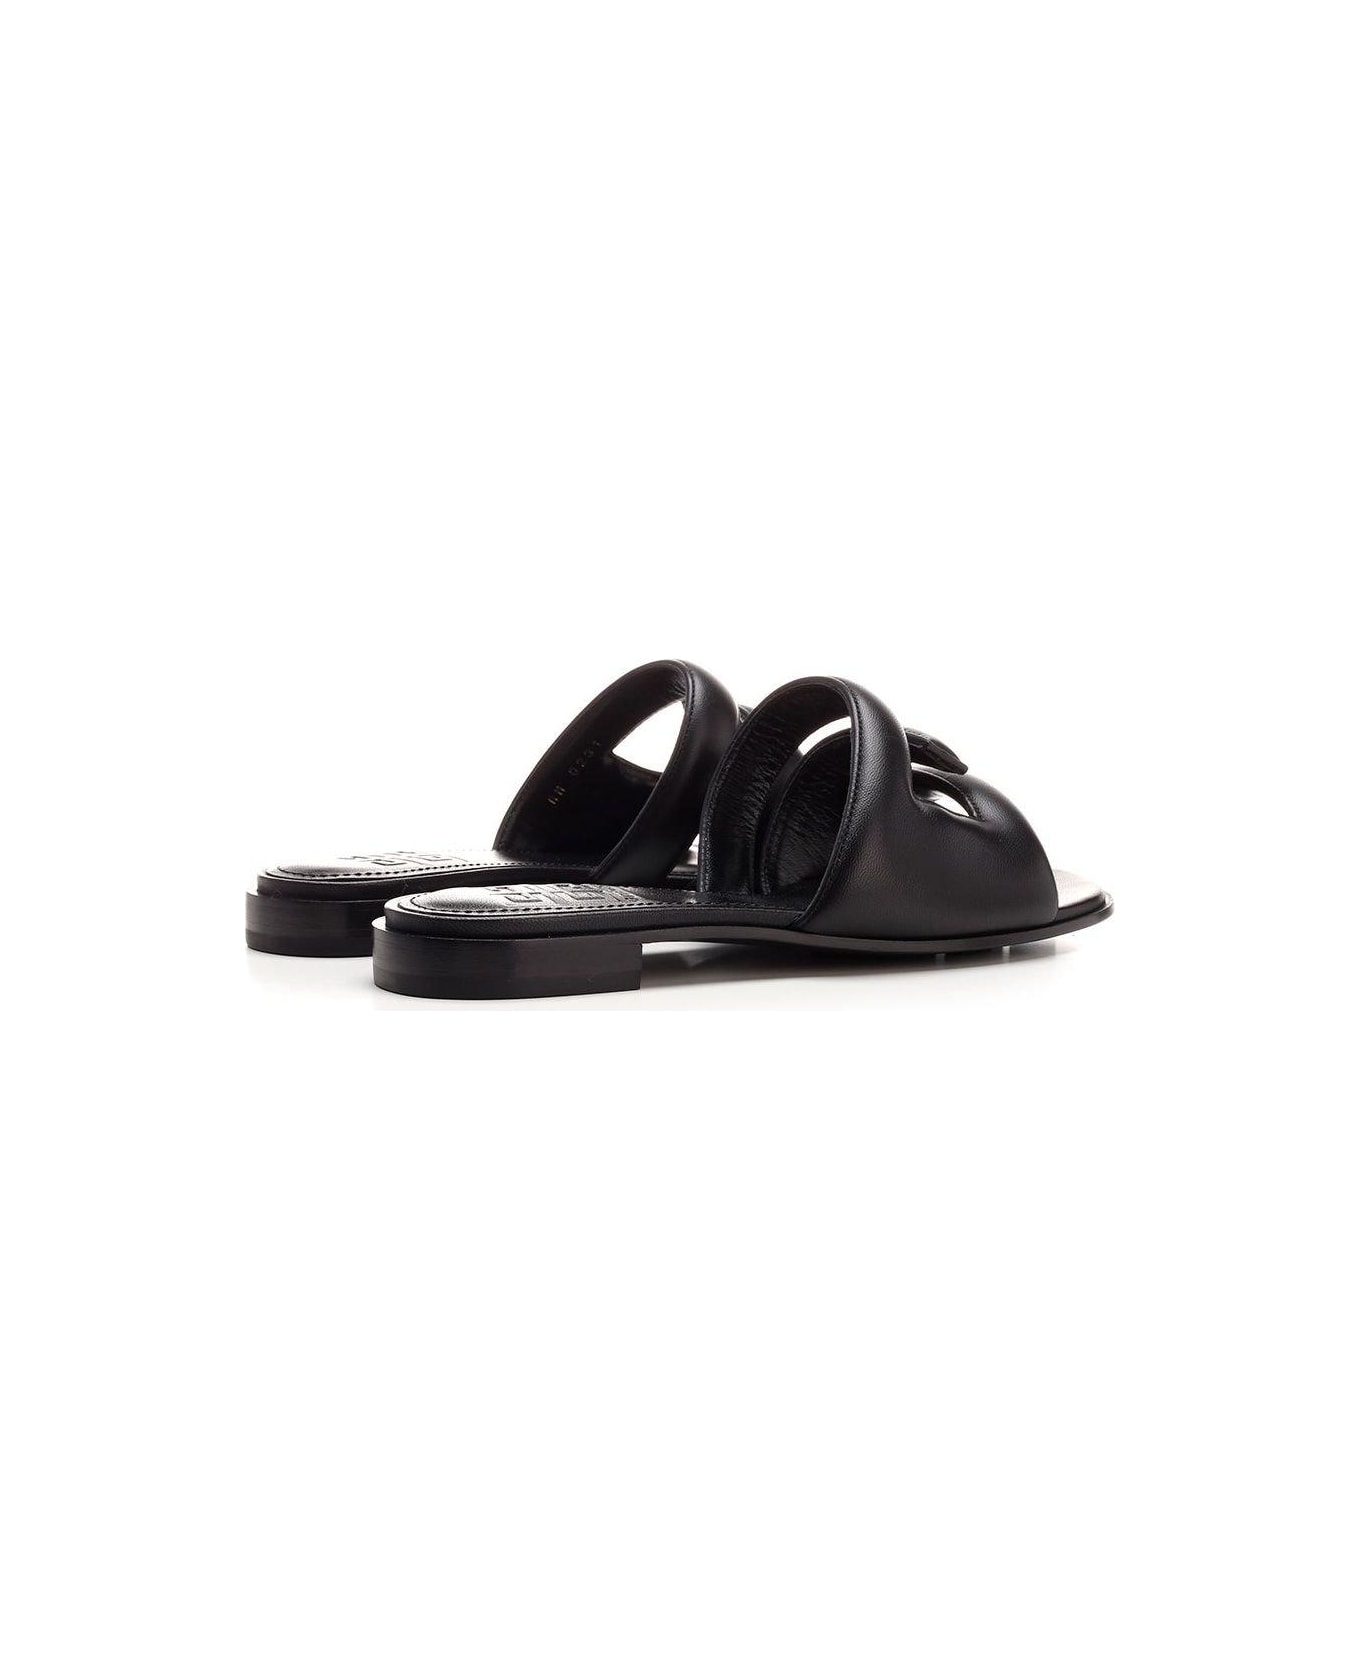 Givenchy Padded G Sandals - BLACK